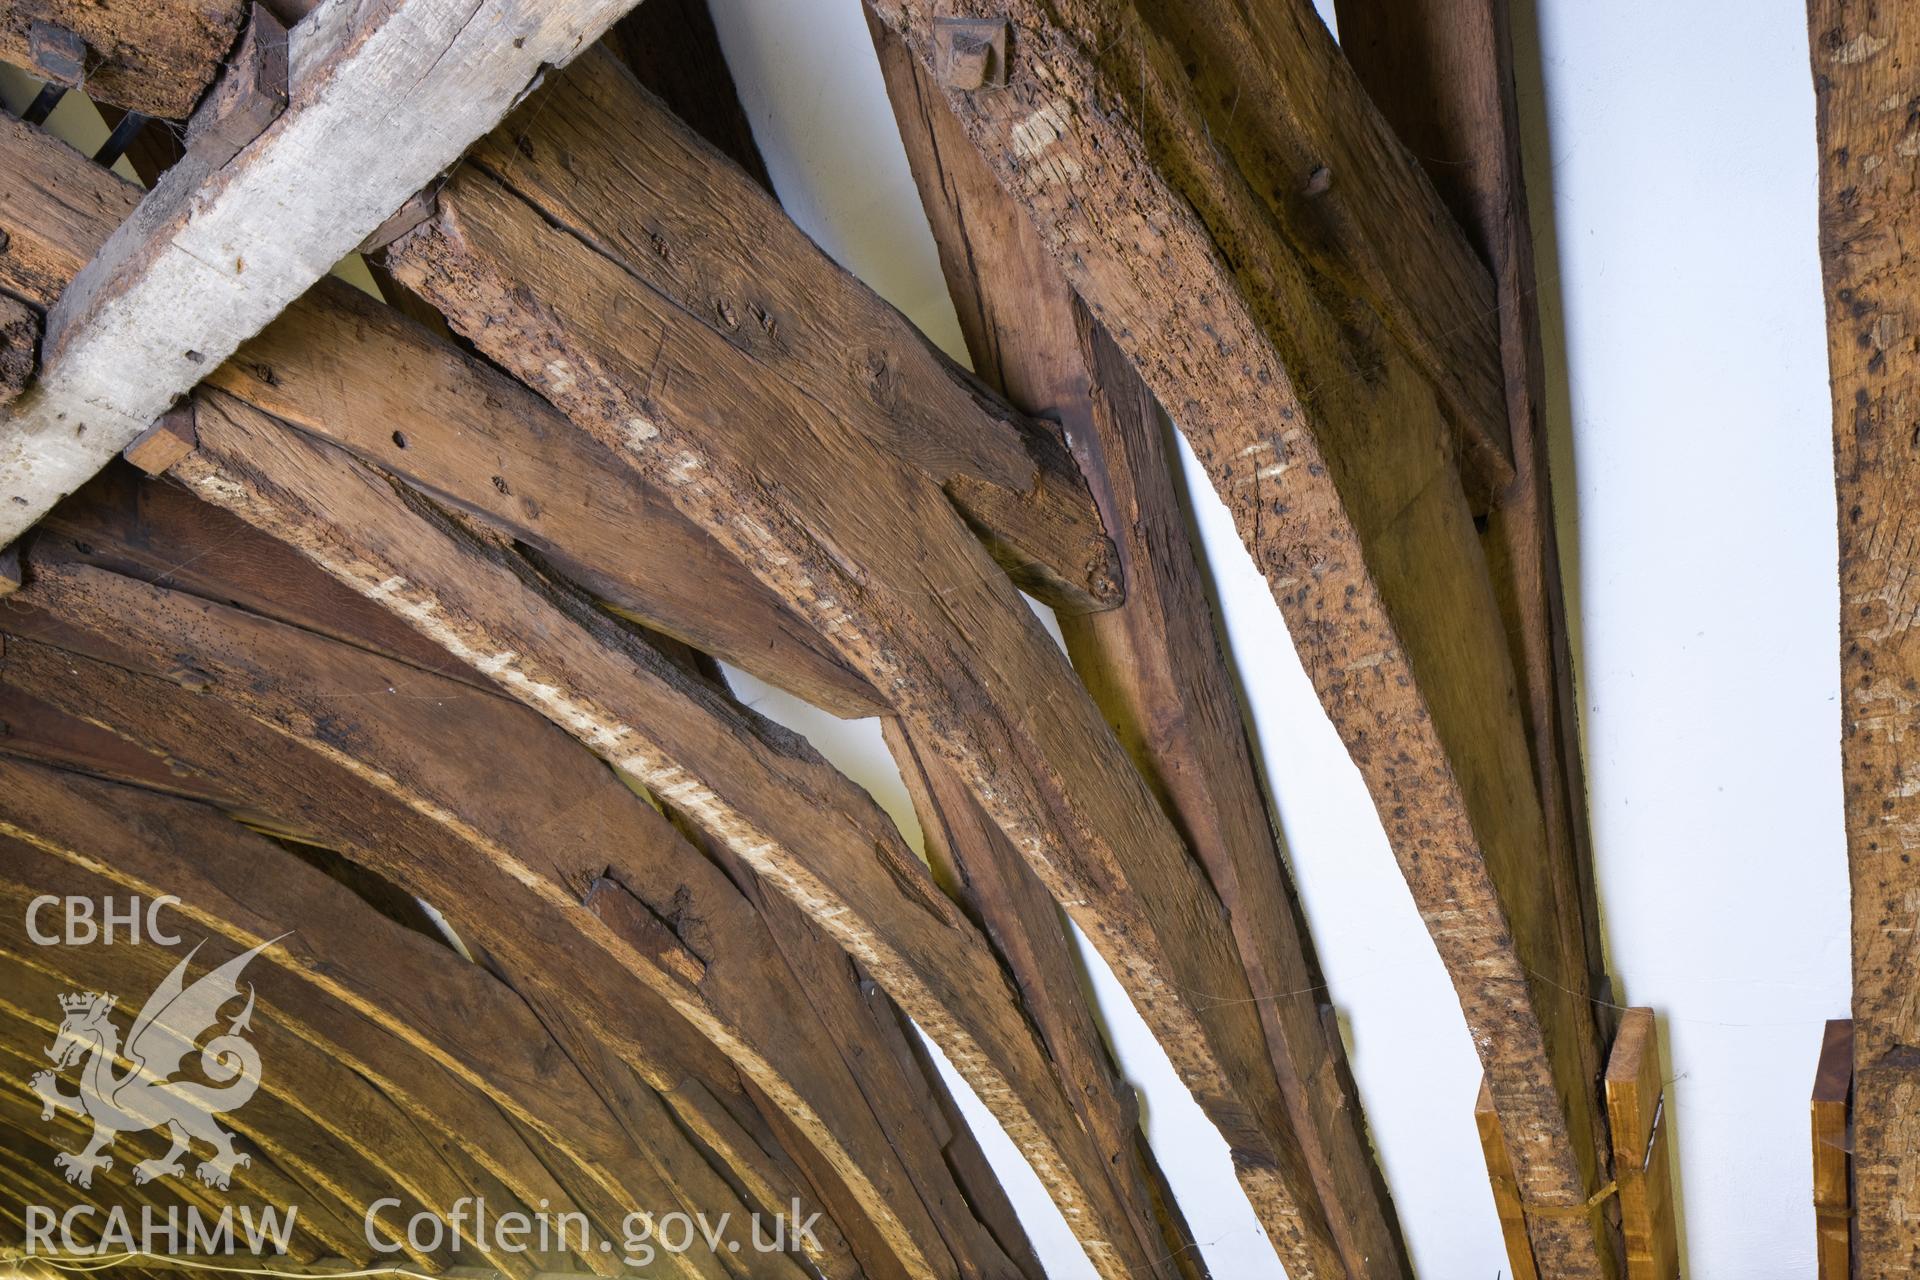 Detail of roof jointing.